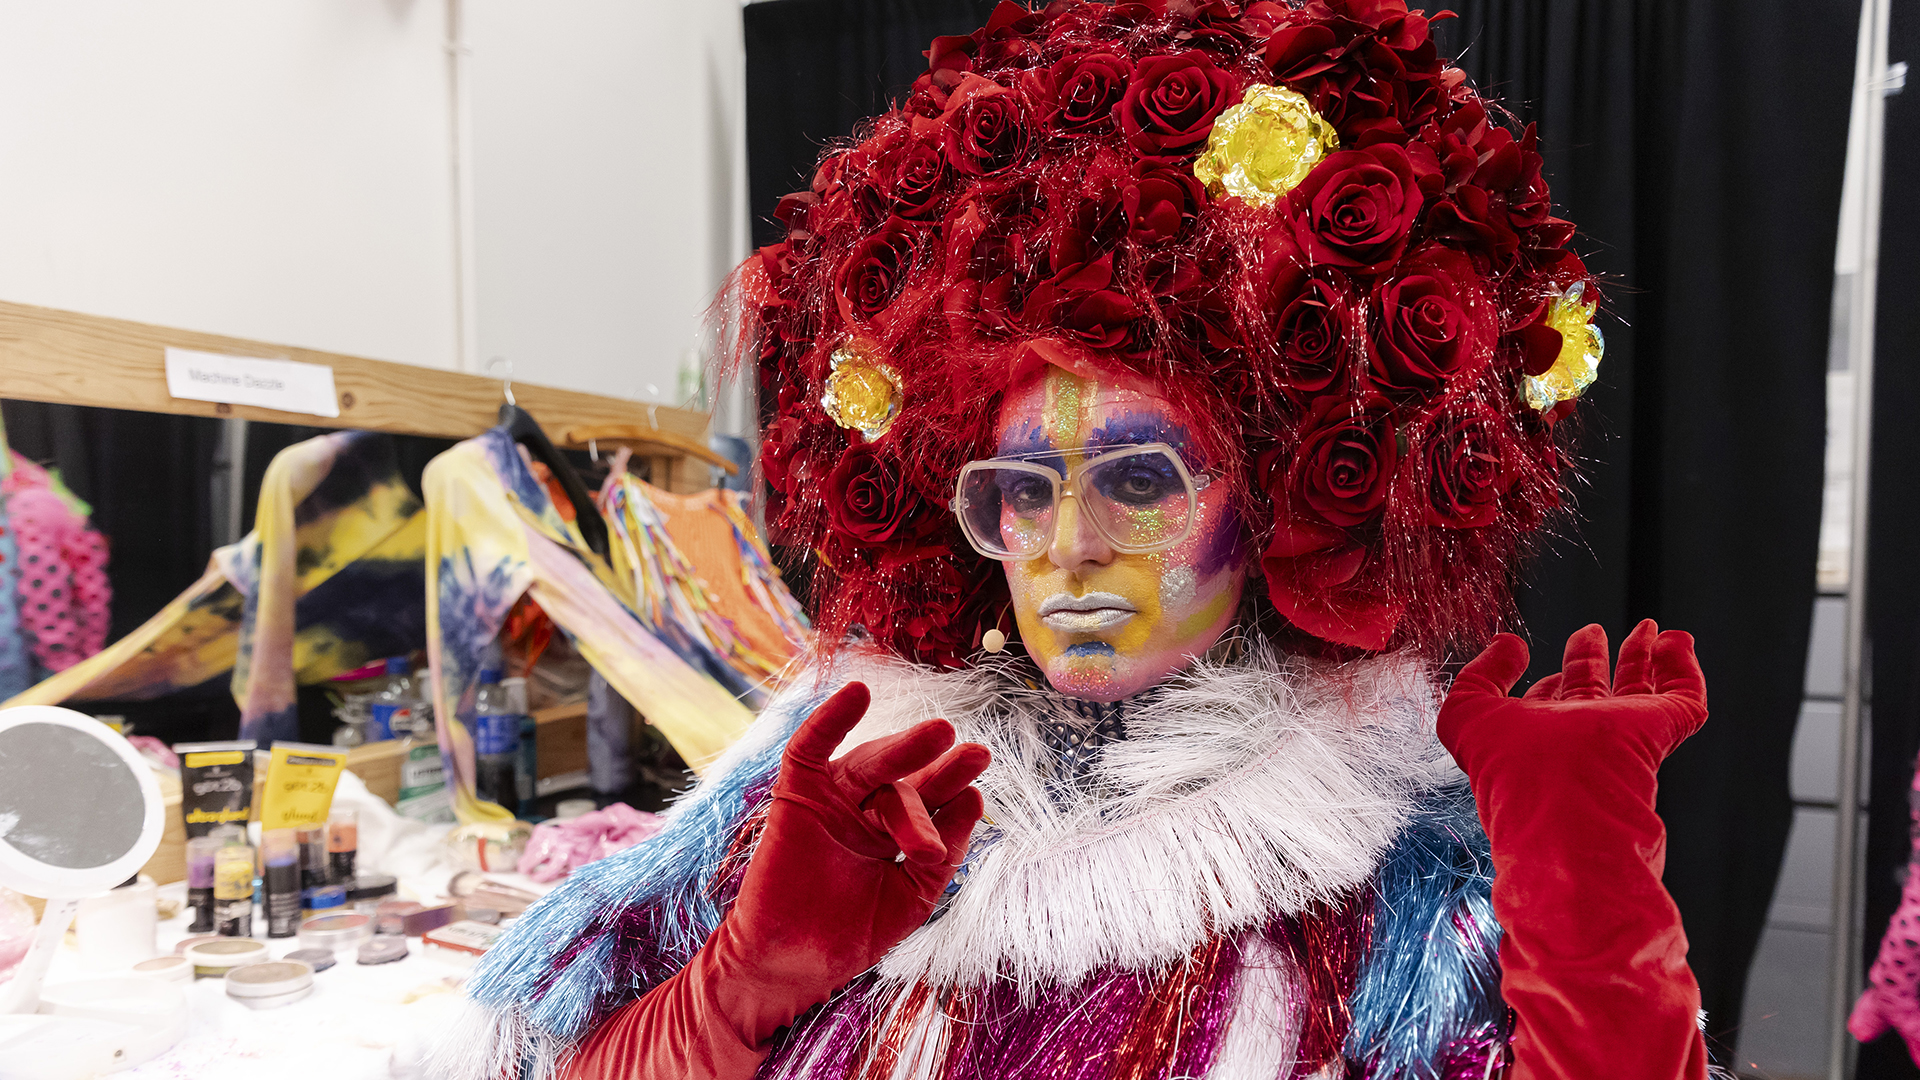 Machine Dazzle, dressed in a huge wig made of bright red and a few yellow fake roses, a red, white and blue tinsel dress and long red velvety gloves with bright makeup covering his face, poses for a portrait